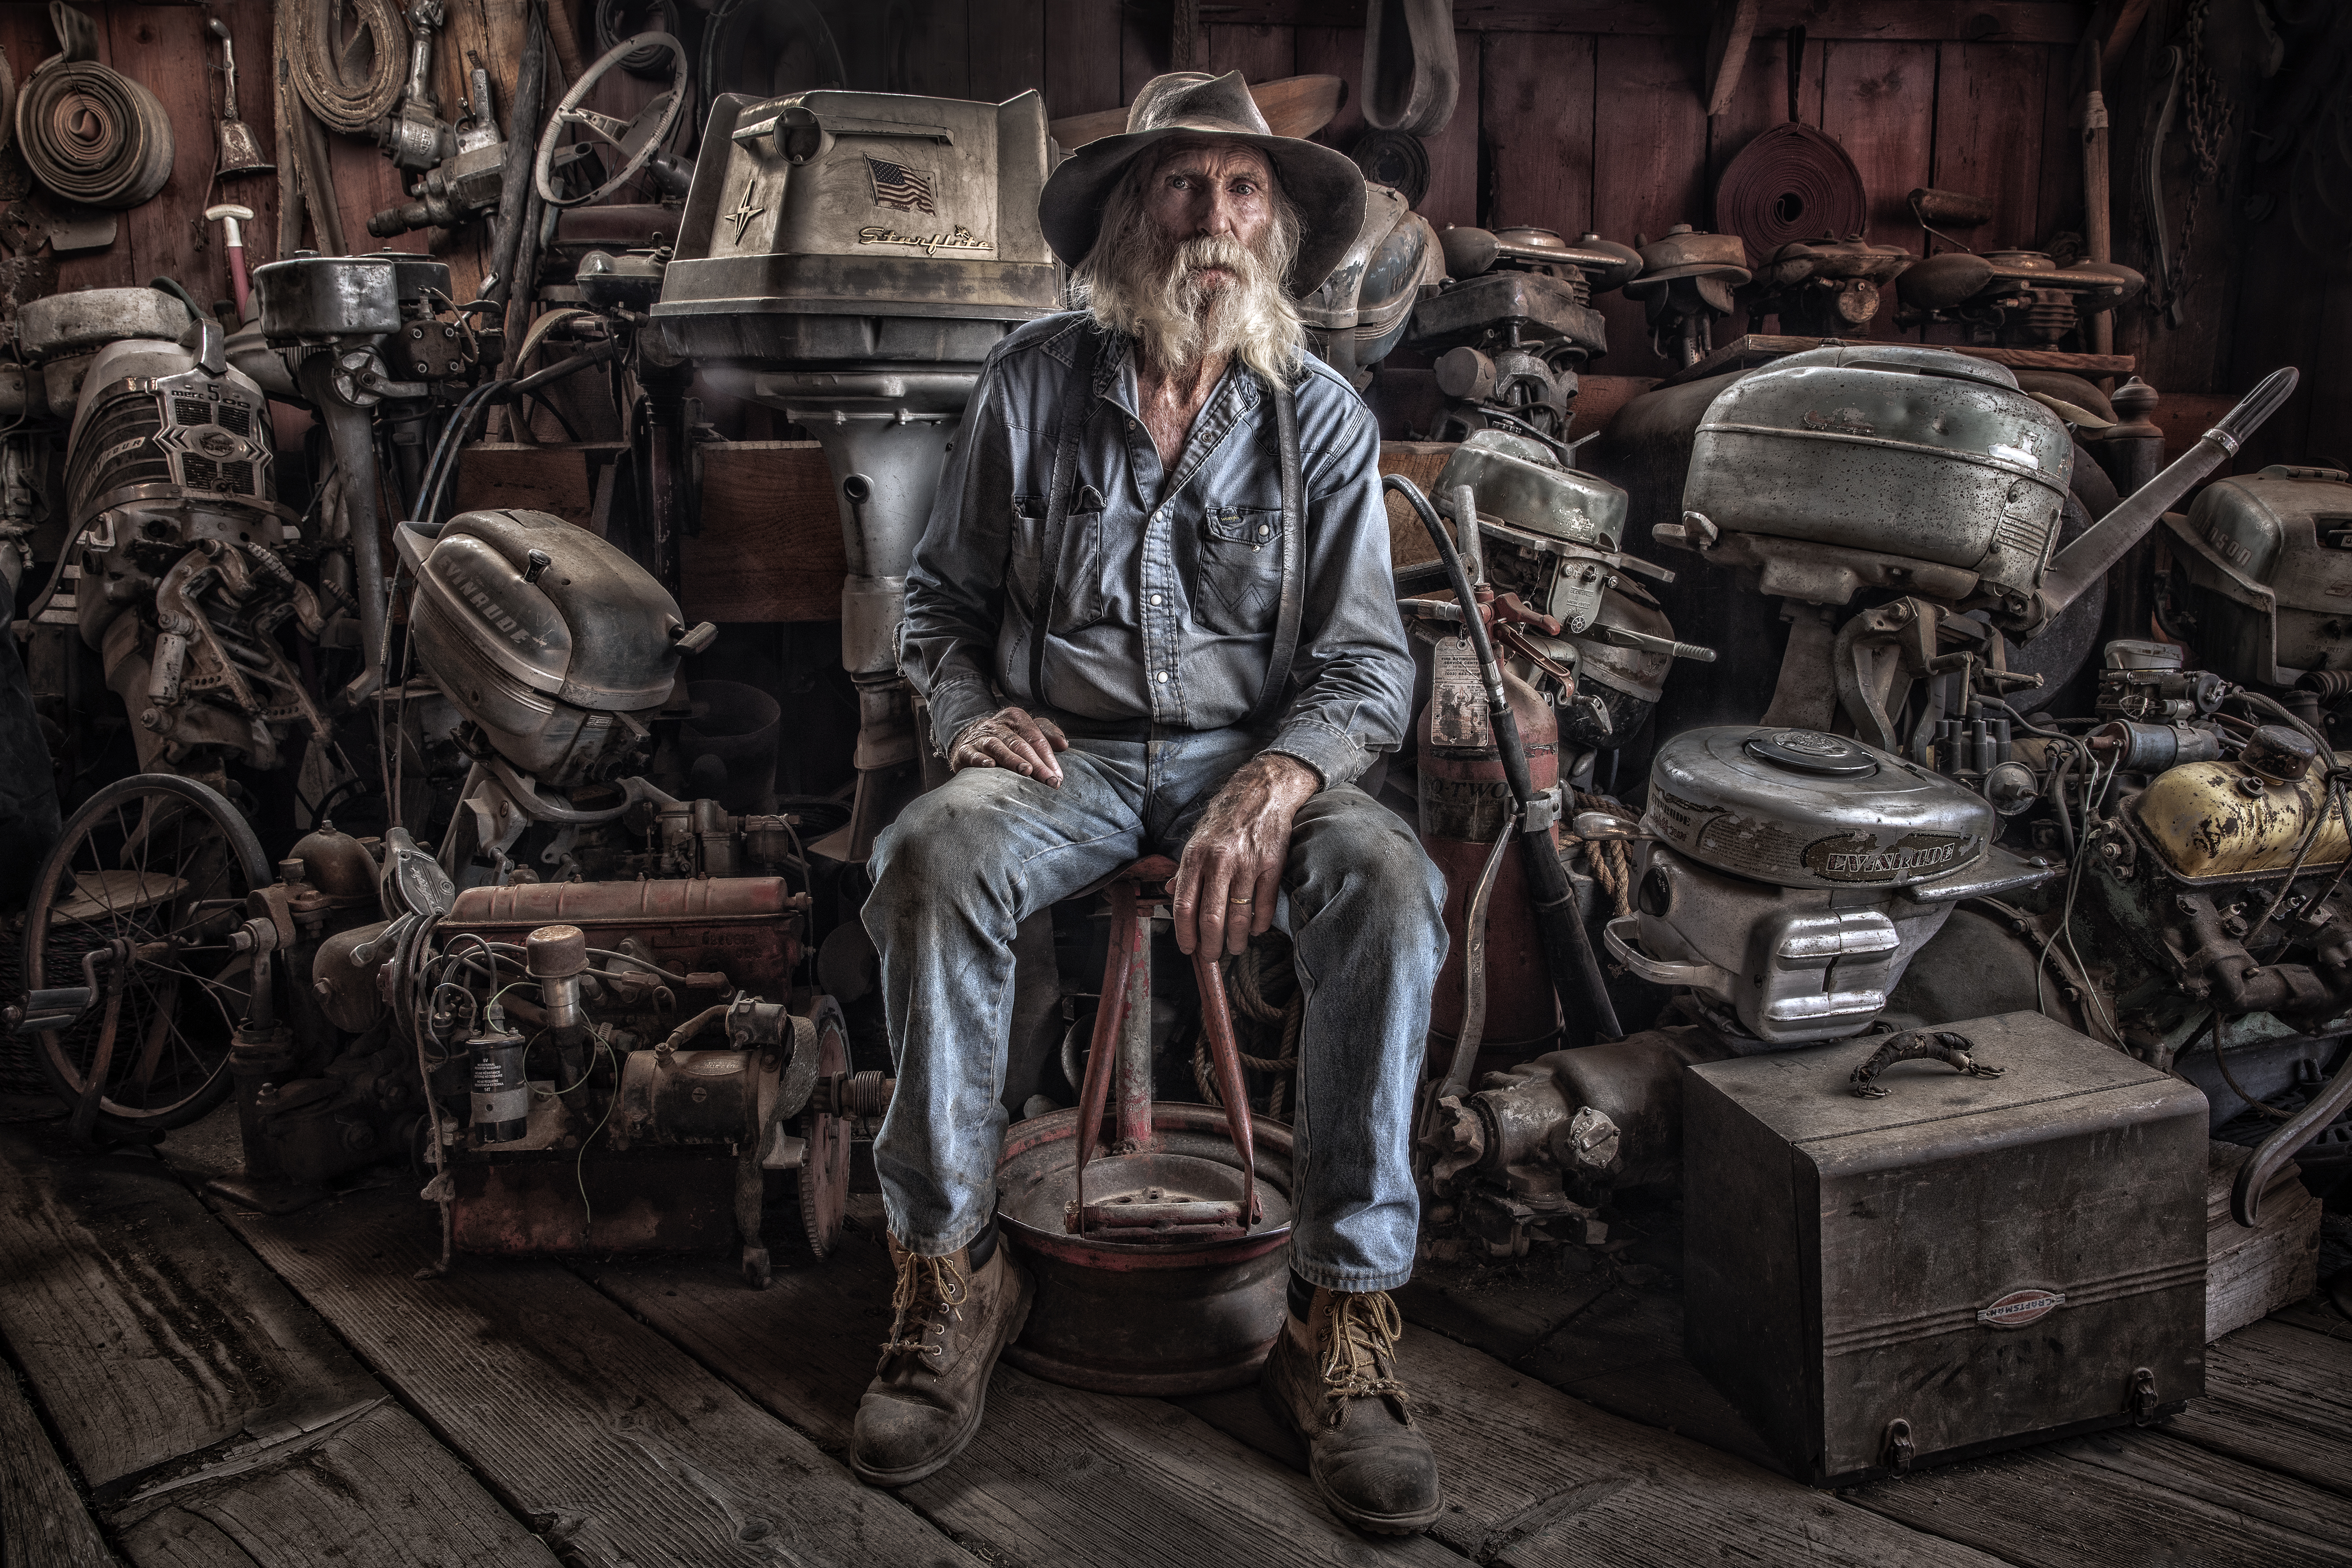  Collector of old outboard motors  | Dovis Bird Agency Photography